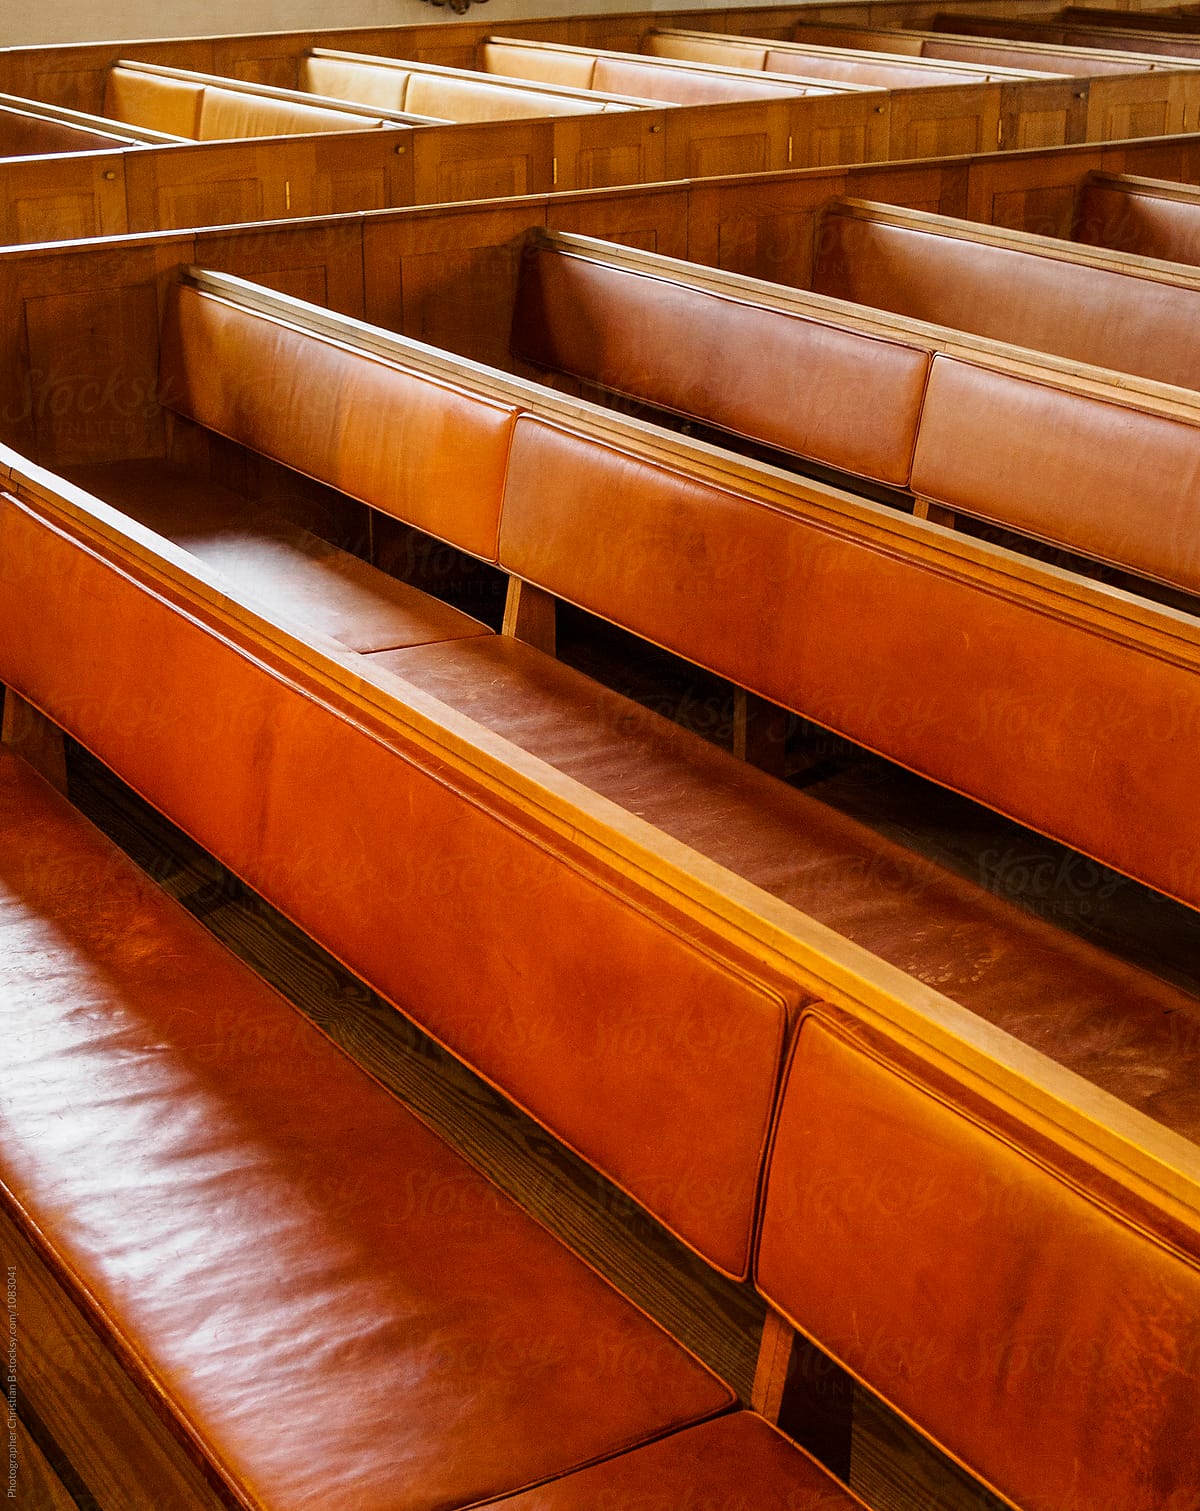 Leather clad benches in a church